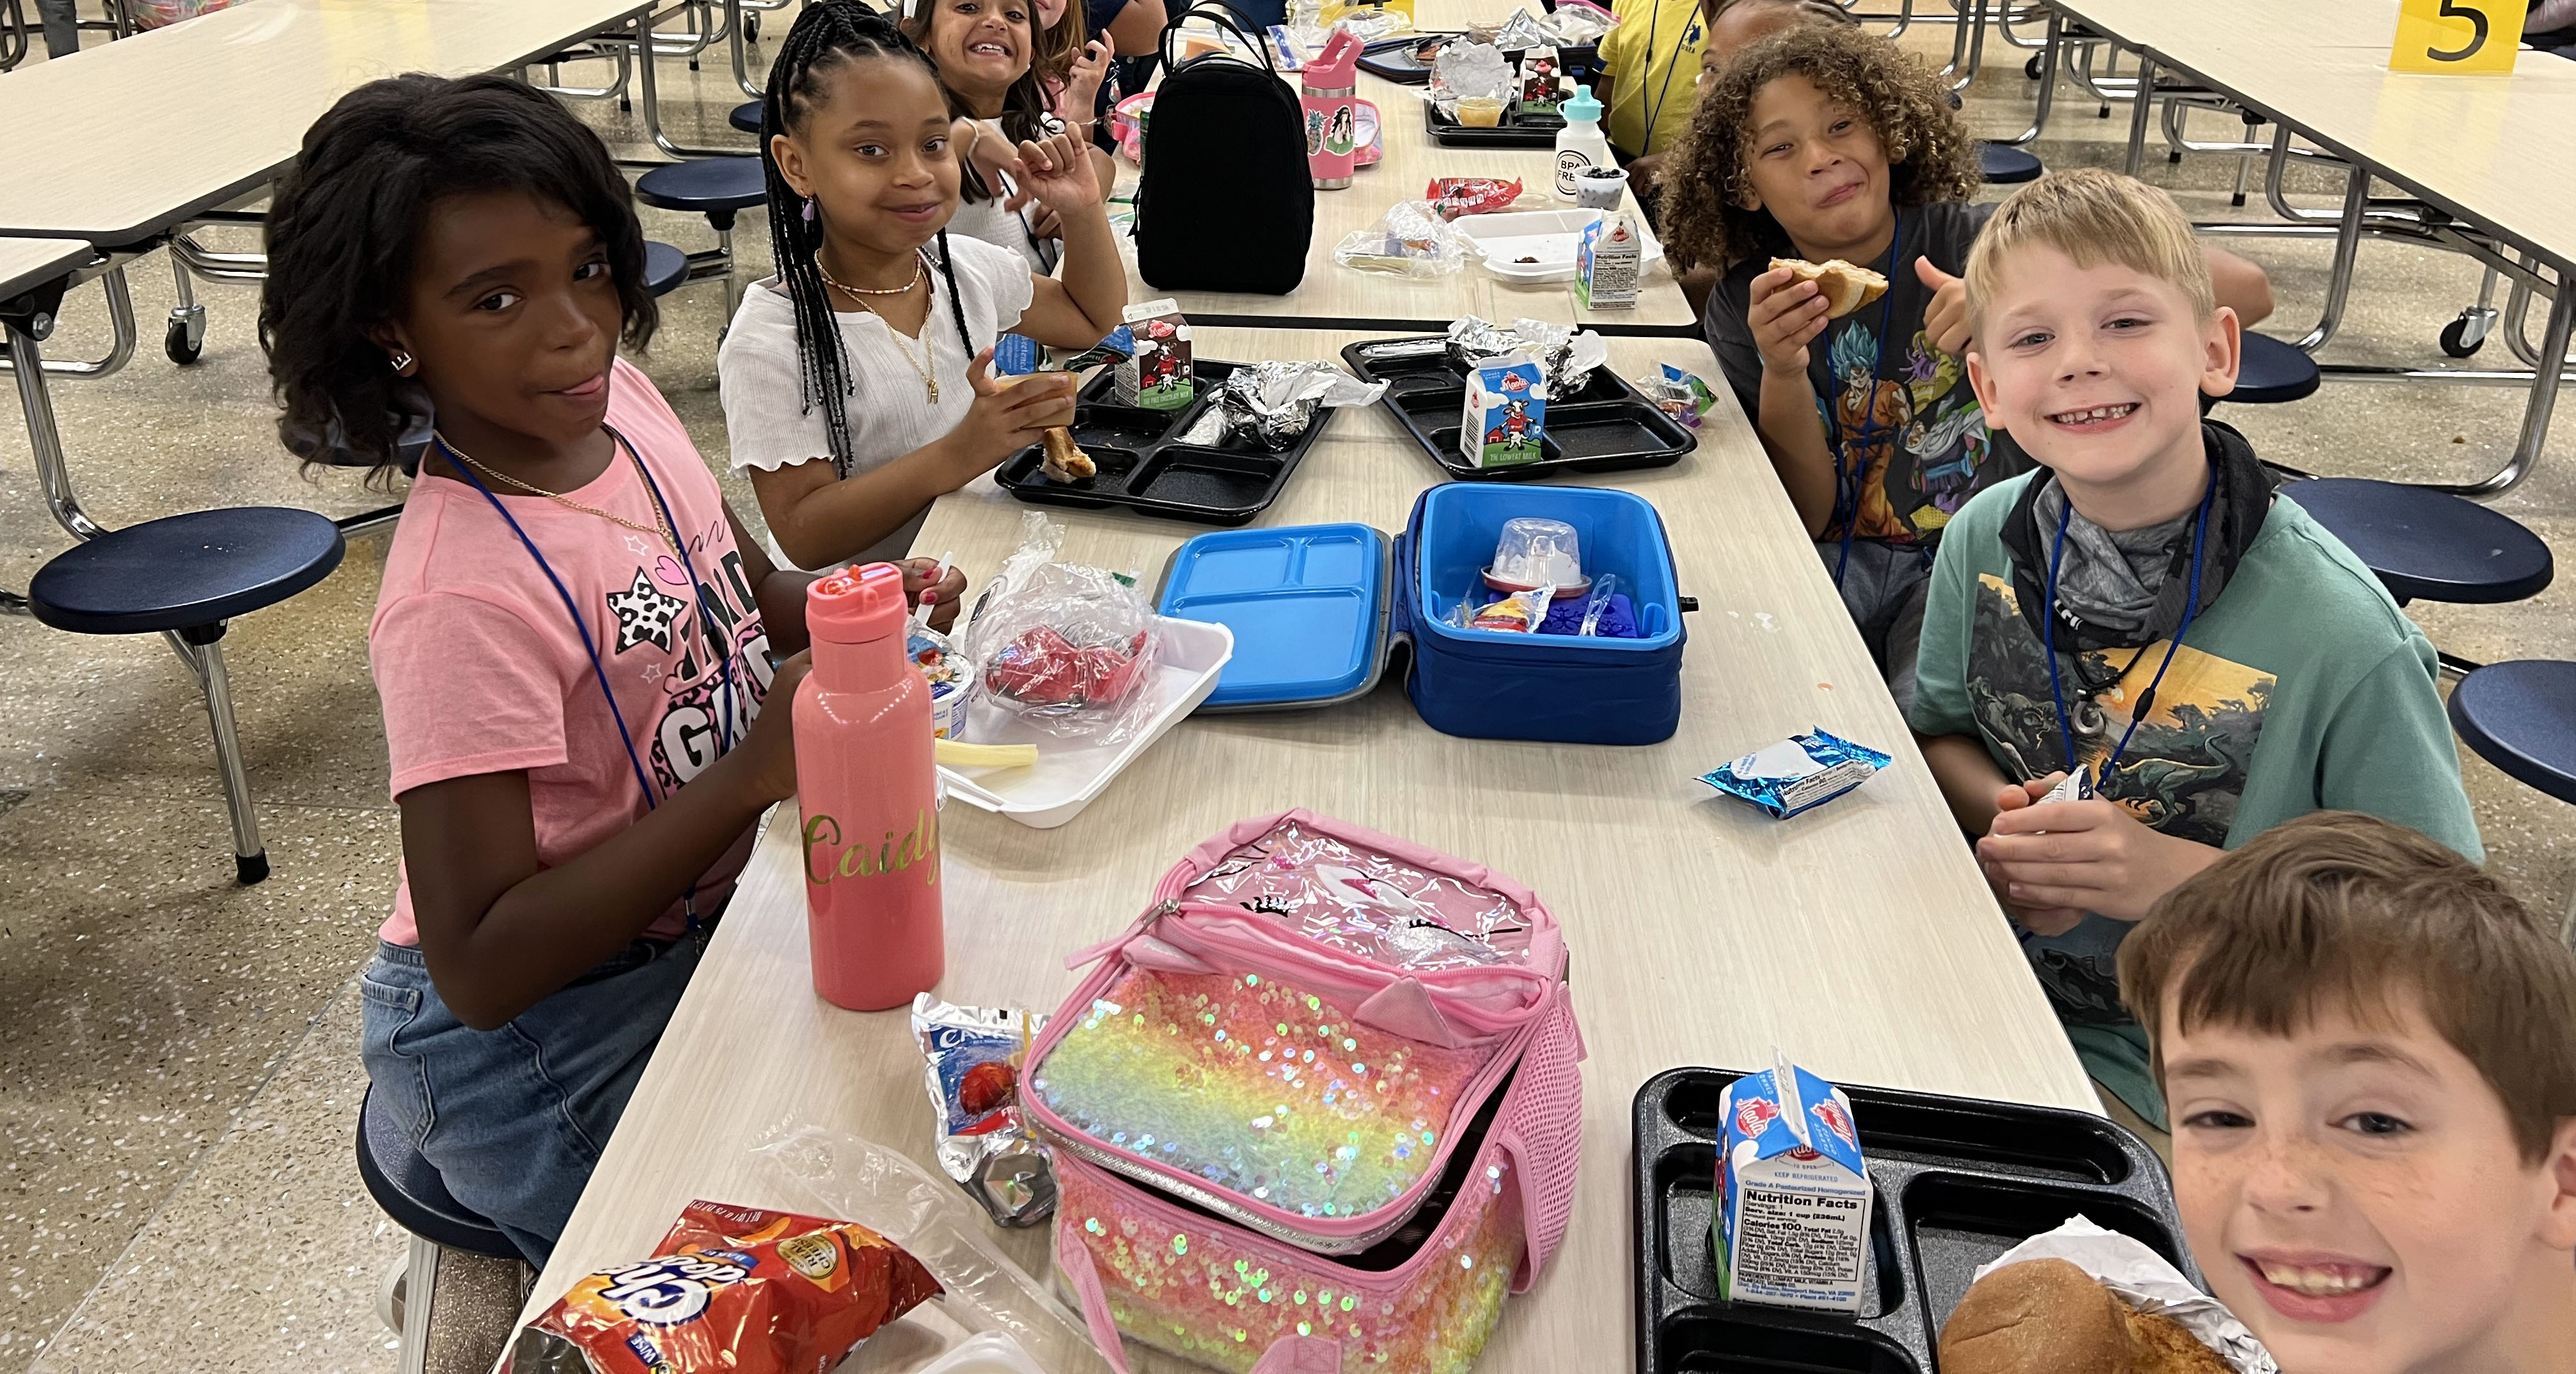 Students eating lunch at the lunch table